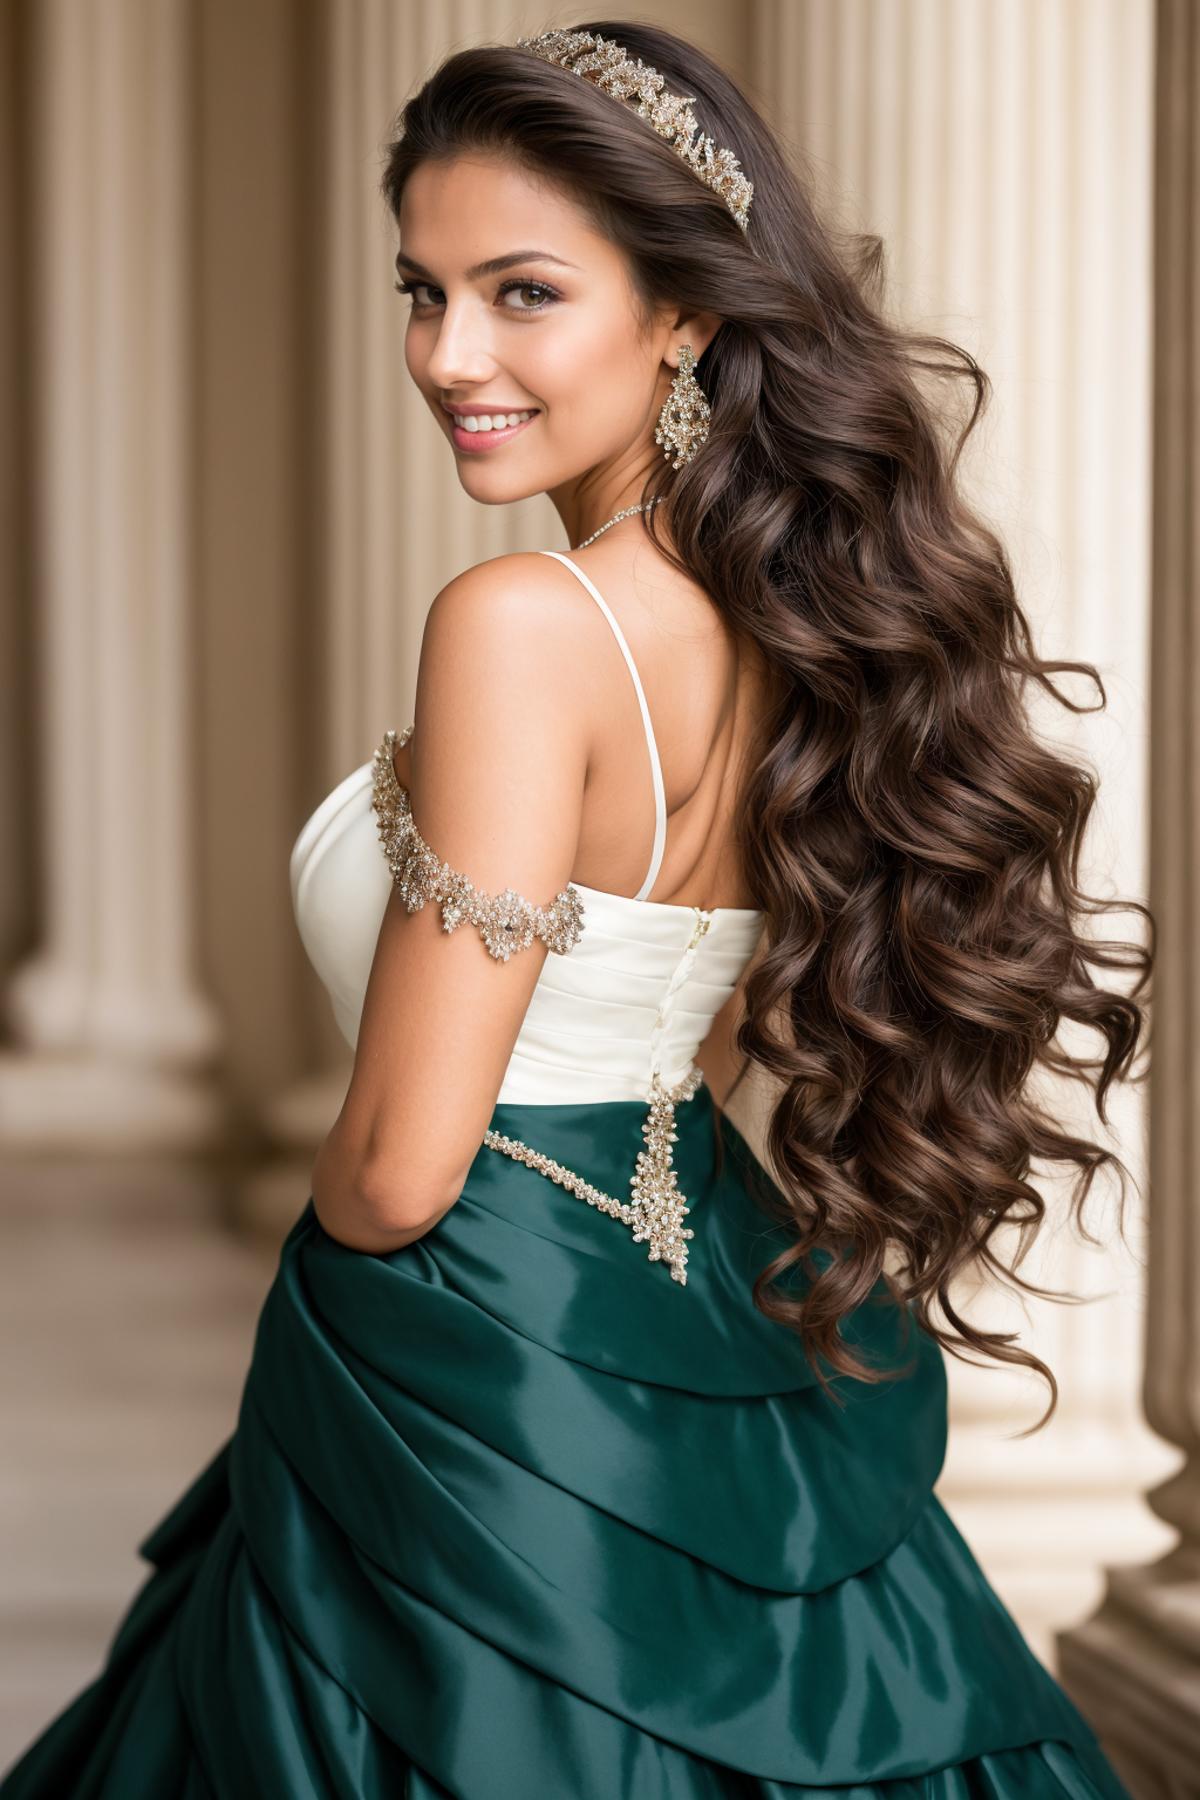 A young woman wearing a long green dress, posing with a smile.